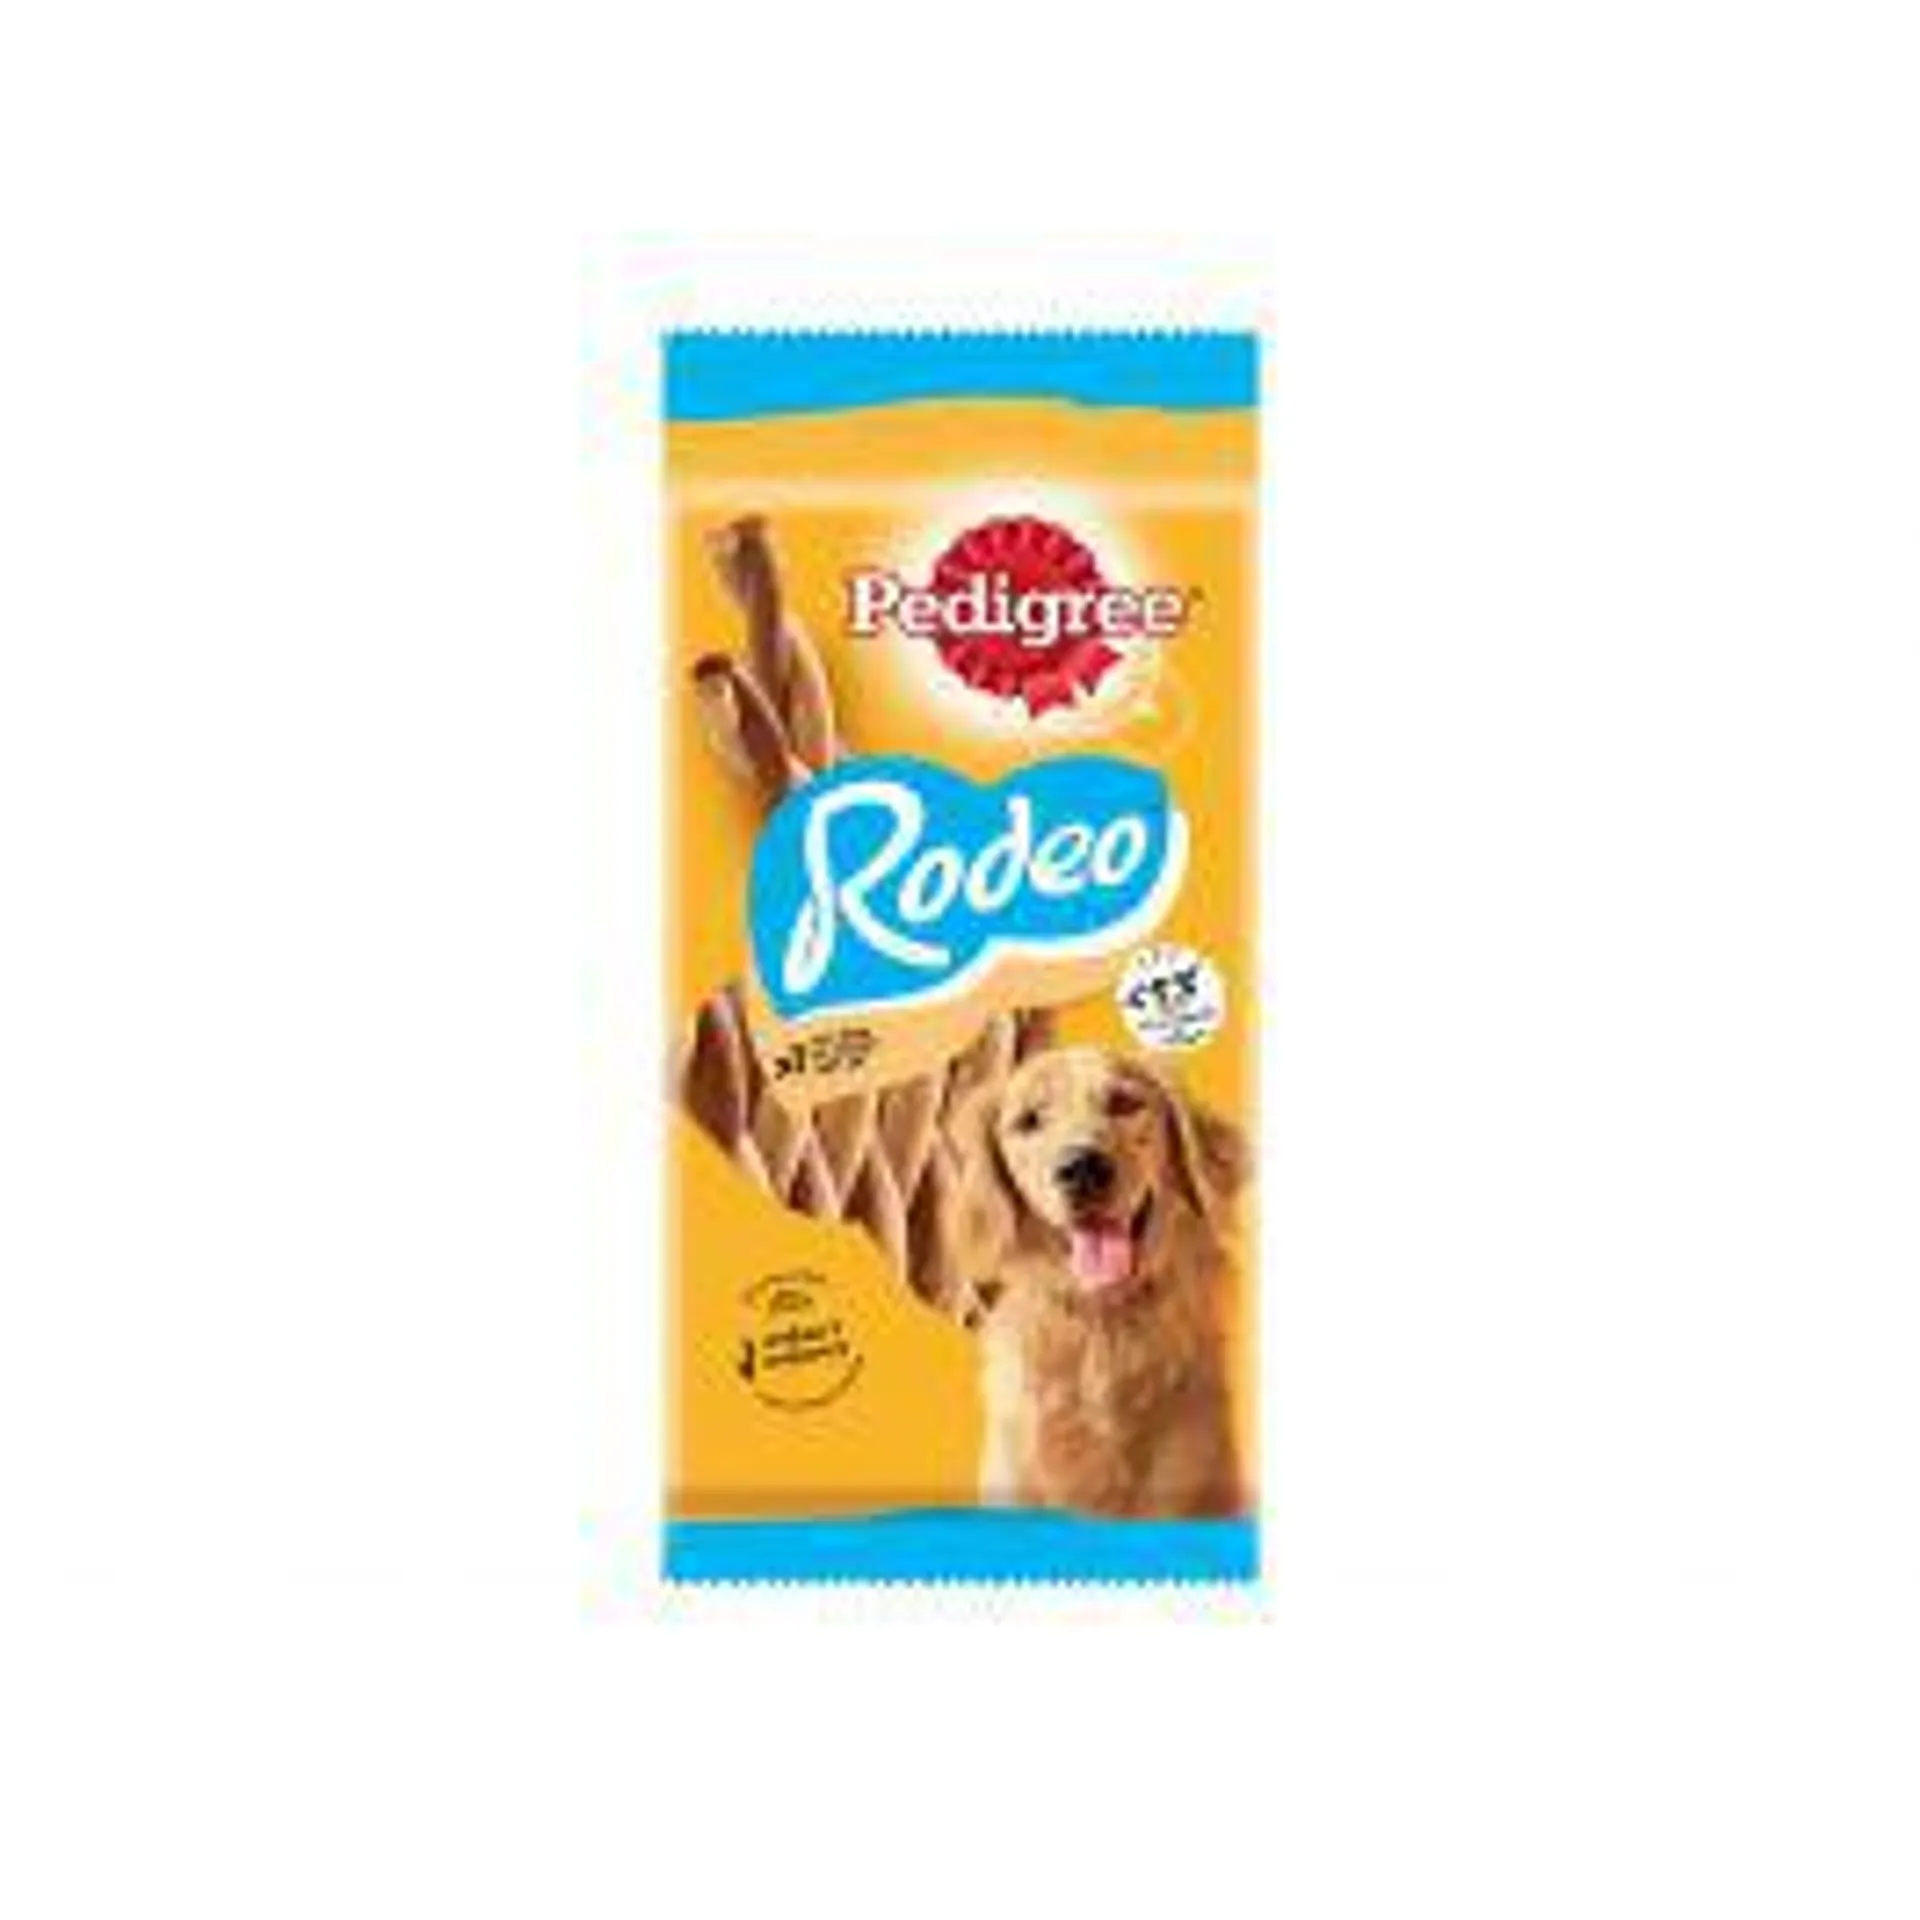 123g ped rodeo volaille 7pc